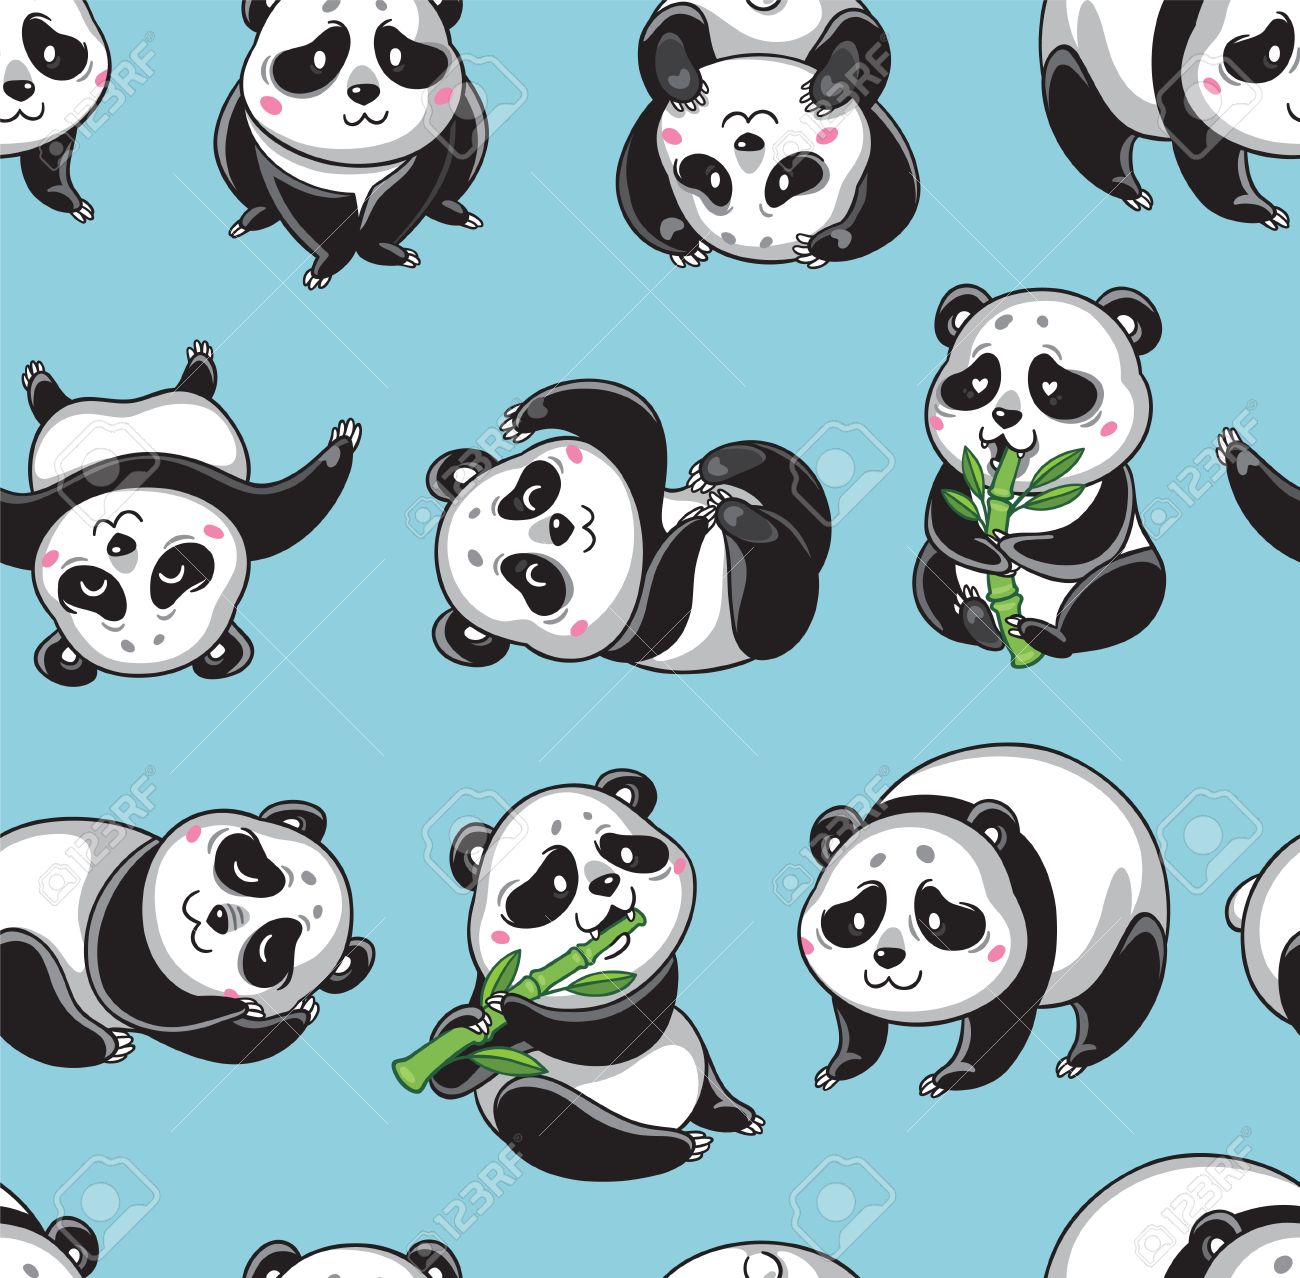 Free download Seamless Cartoon Wallpaper With Cute Pandas Isolated On